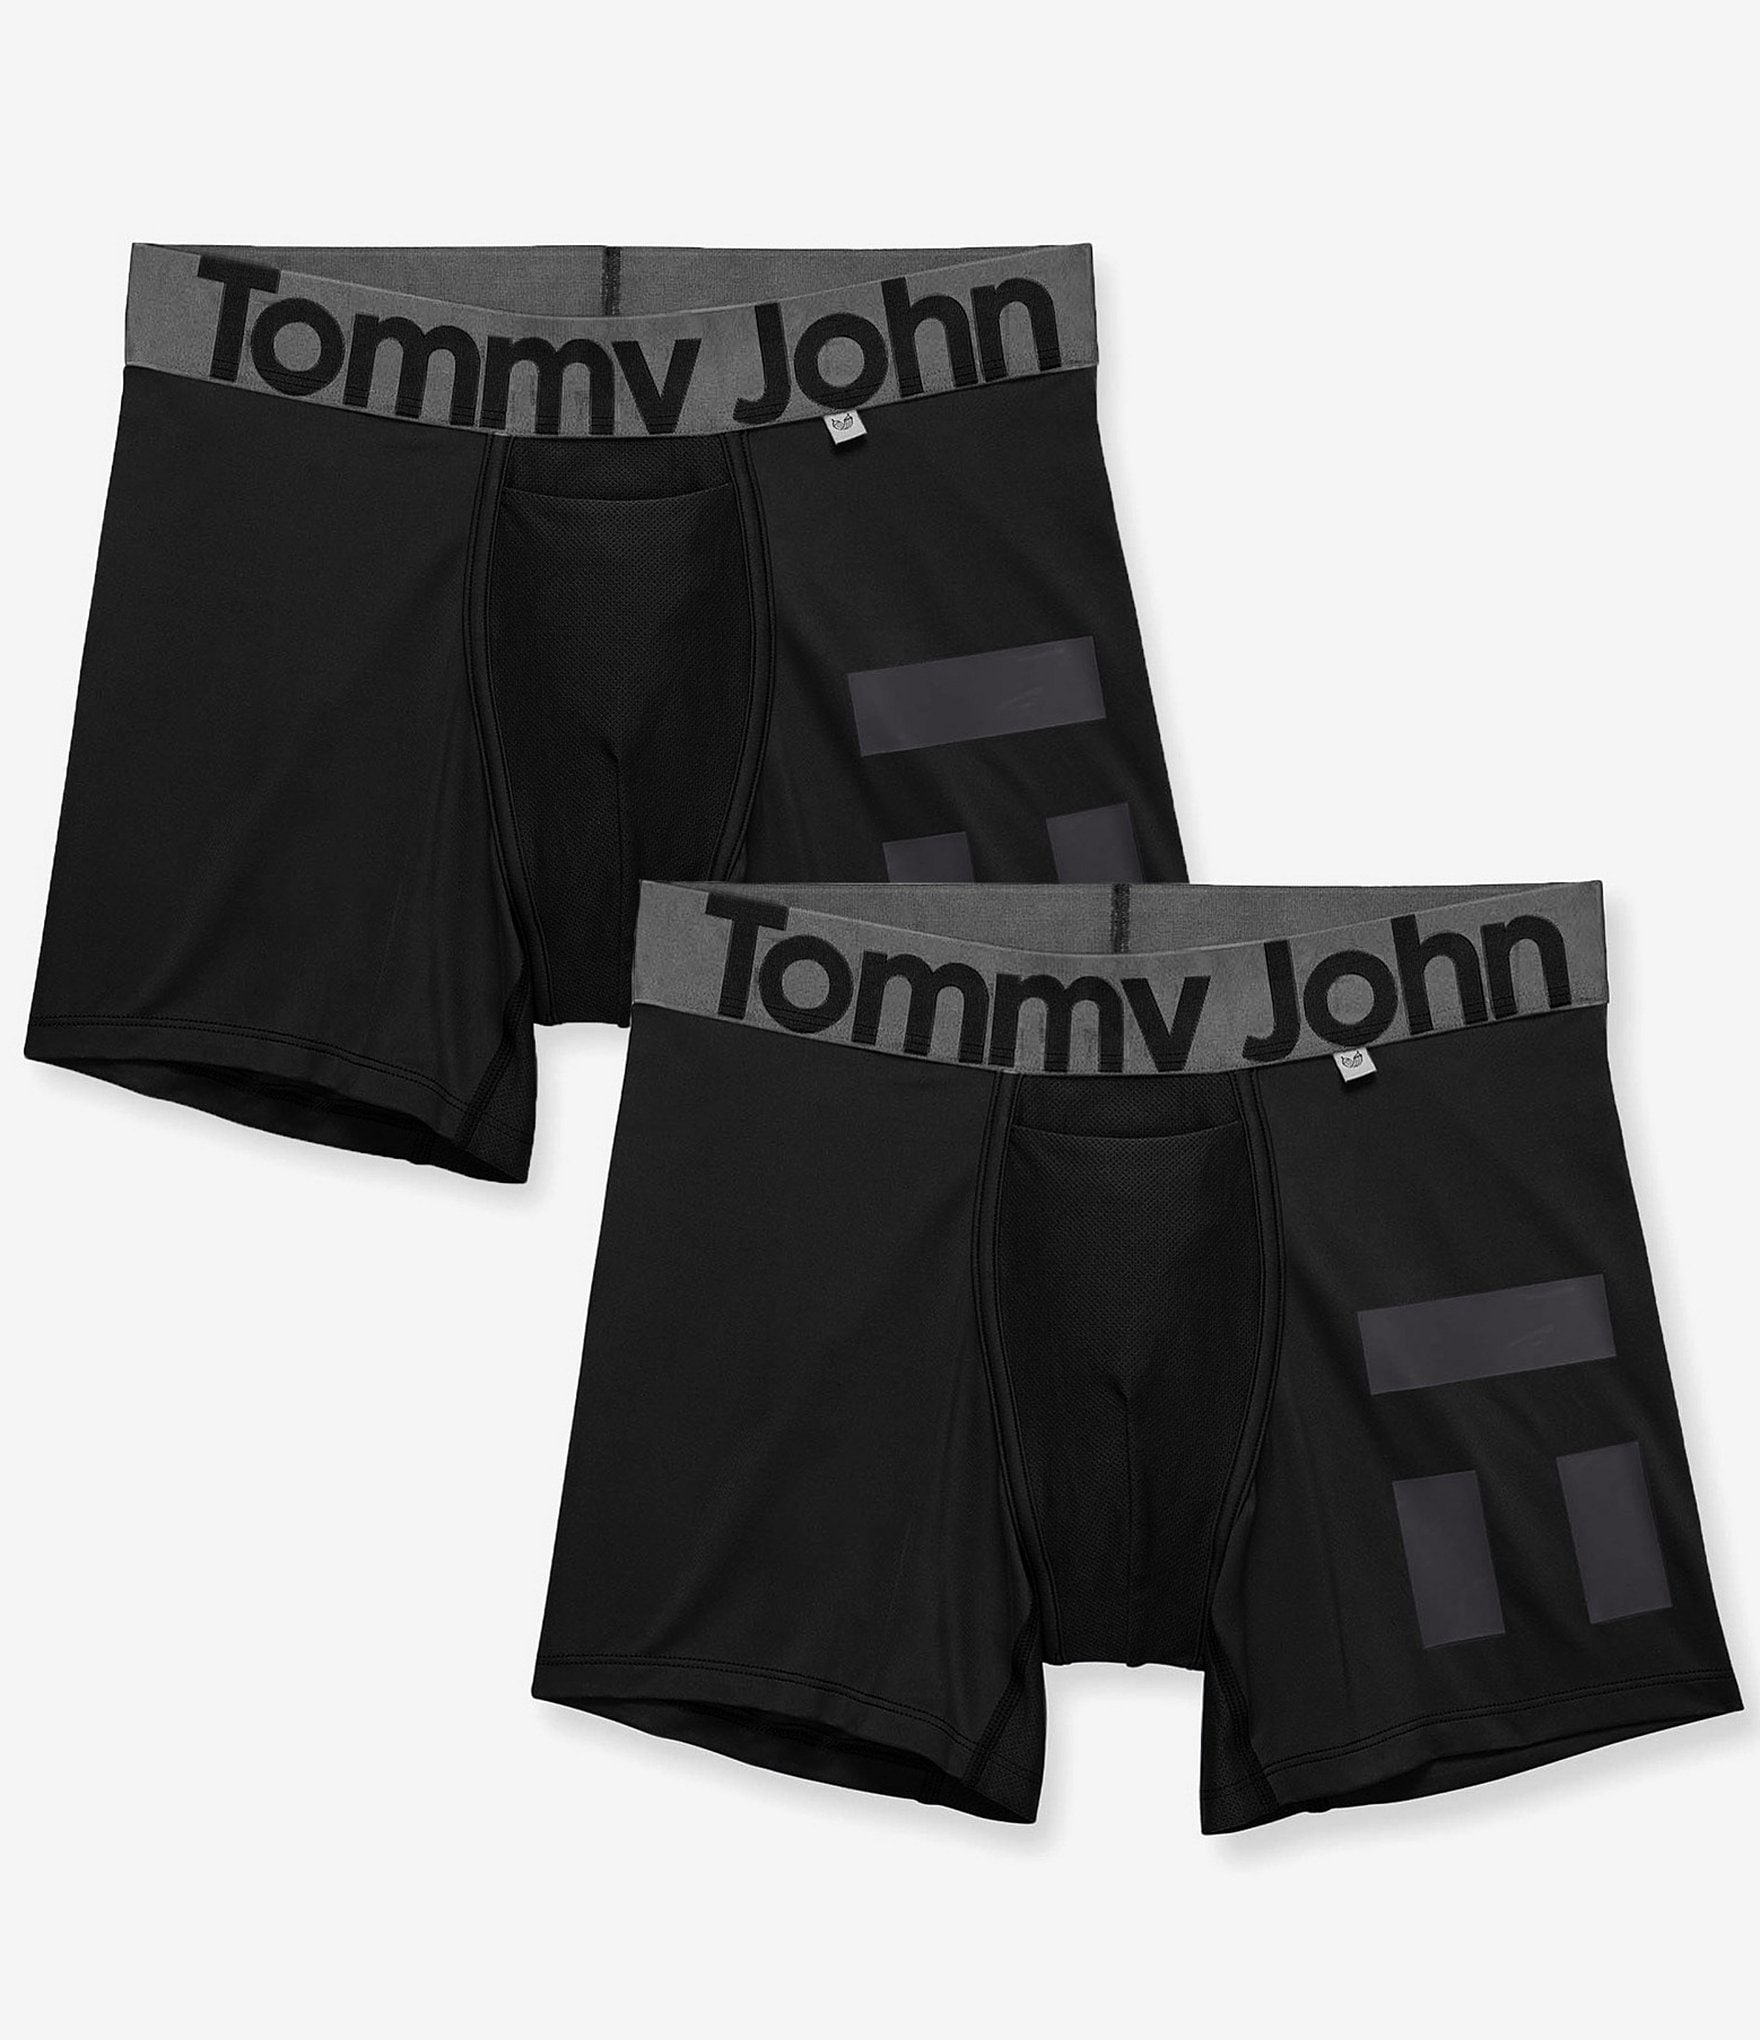 360 Sport 6 Inch Hammock Pouch Boxer Brief by Tommy John